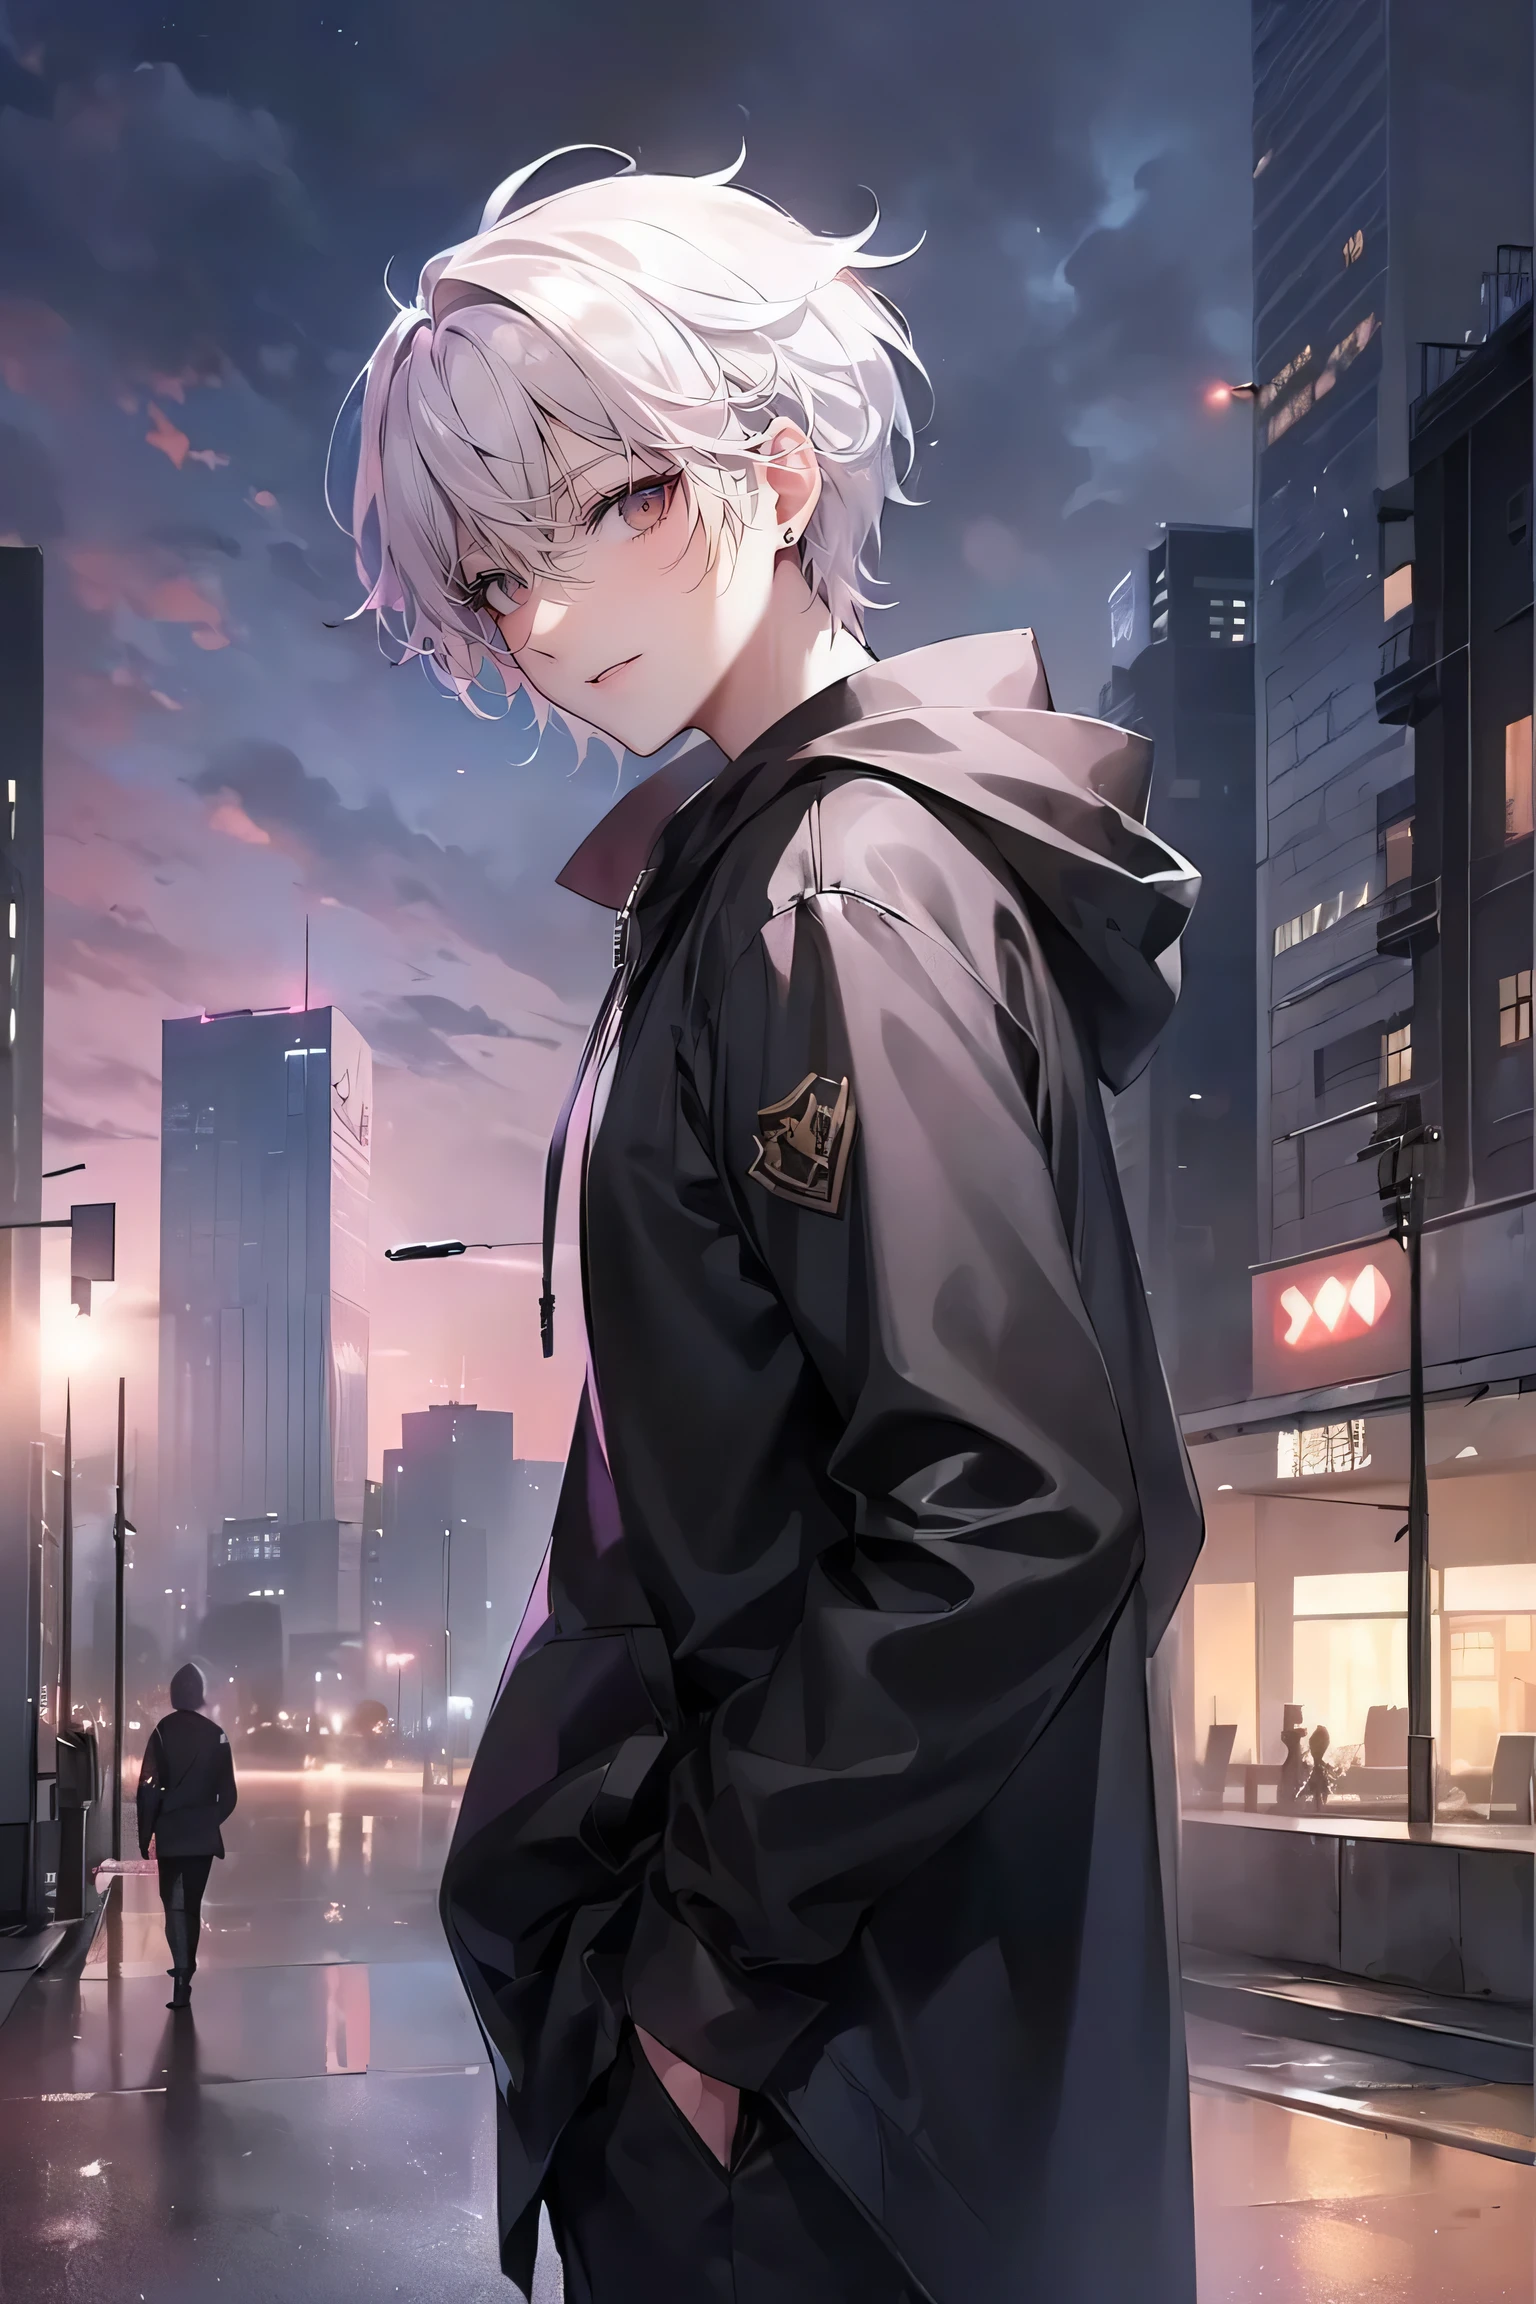 (4K works、(最high quality)、((City of night))、((In front of the main gate of the workplace))、((In front of the main gate of the building))、sunset view、adult male、((adult male 26 years old))、Cheerful man、expensive、((smiling face))、((Strong Eyes))、((He is wearing a black hoodie、Wearing black trousers))、((face becomes smaller))、because I&#39;thin、((white hair))、((White short-haired))、((purple eyes))、((Shot from a close angle))、((one person))、((solo photo))、((Stand in front of the main gate))8K, High resolution, realistic, high quality, masterpiece, Character from a low angle, Display the area under your feet, Wearing a black coat and carrying a gun, City background with skyscrapers, Dusk or dawn time